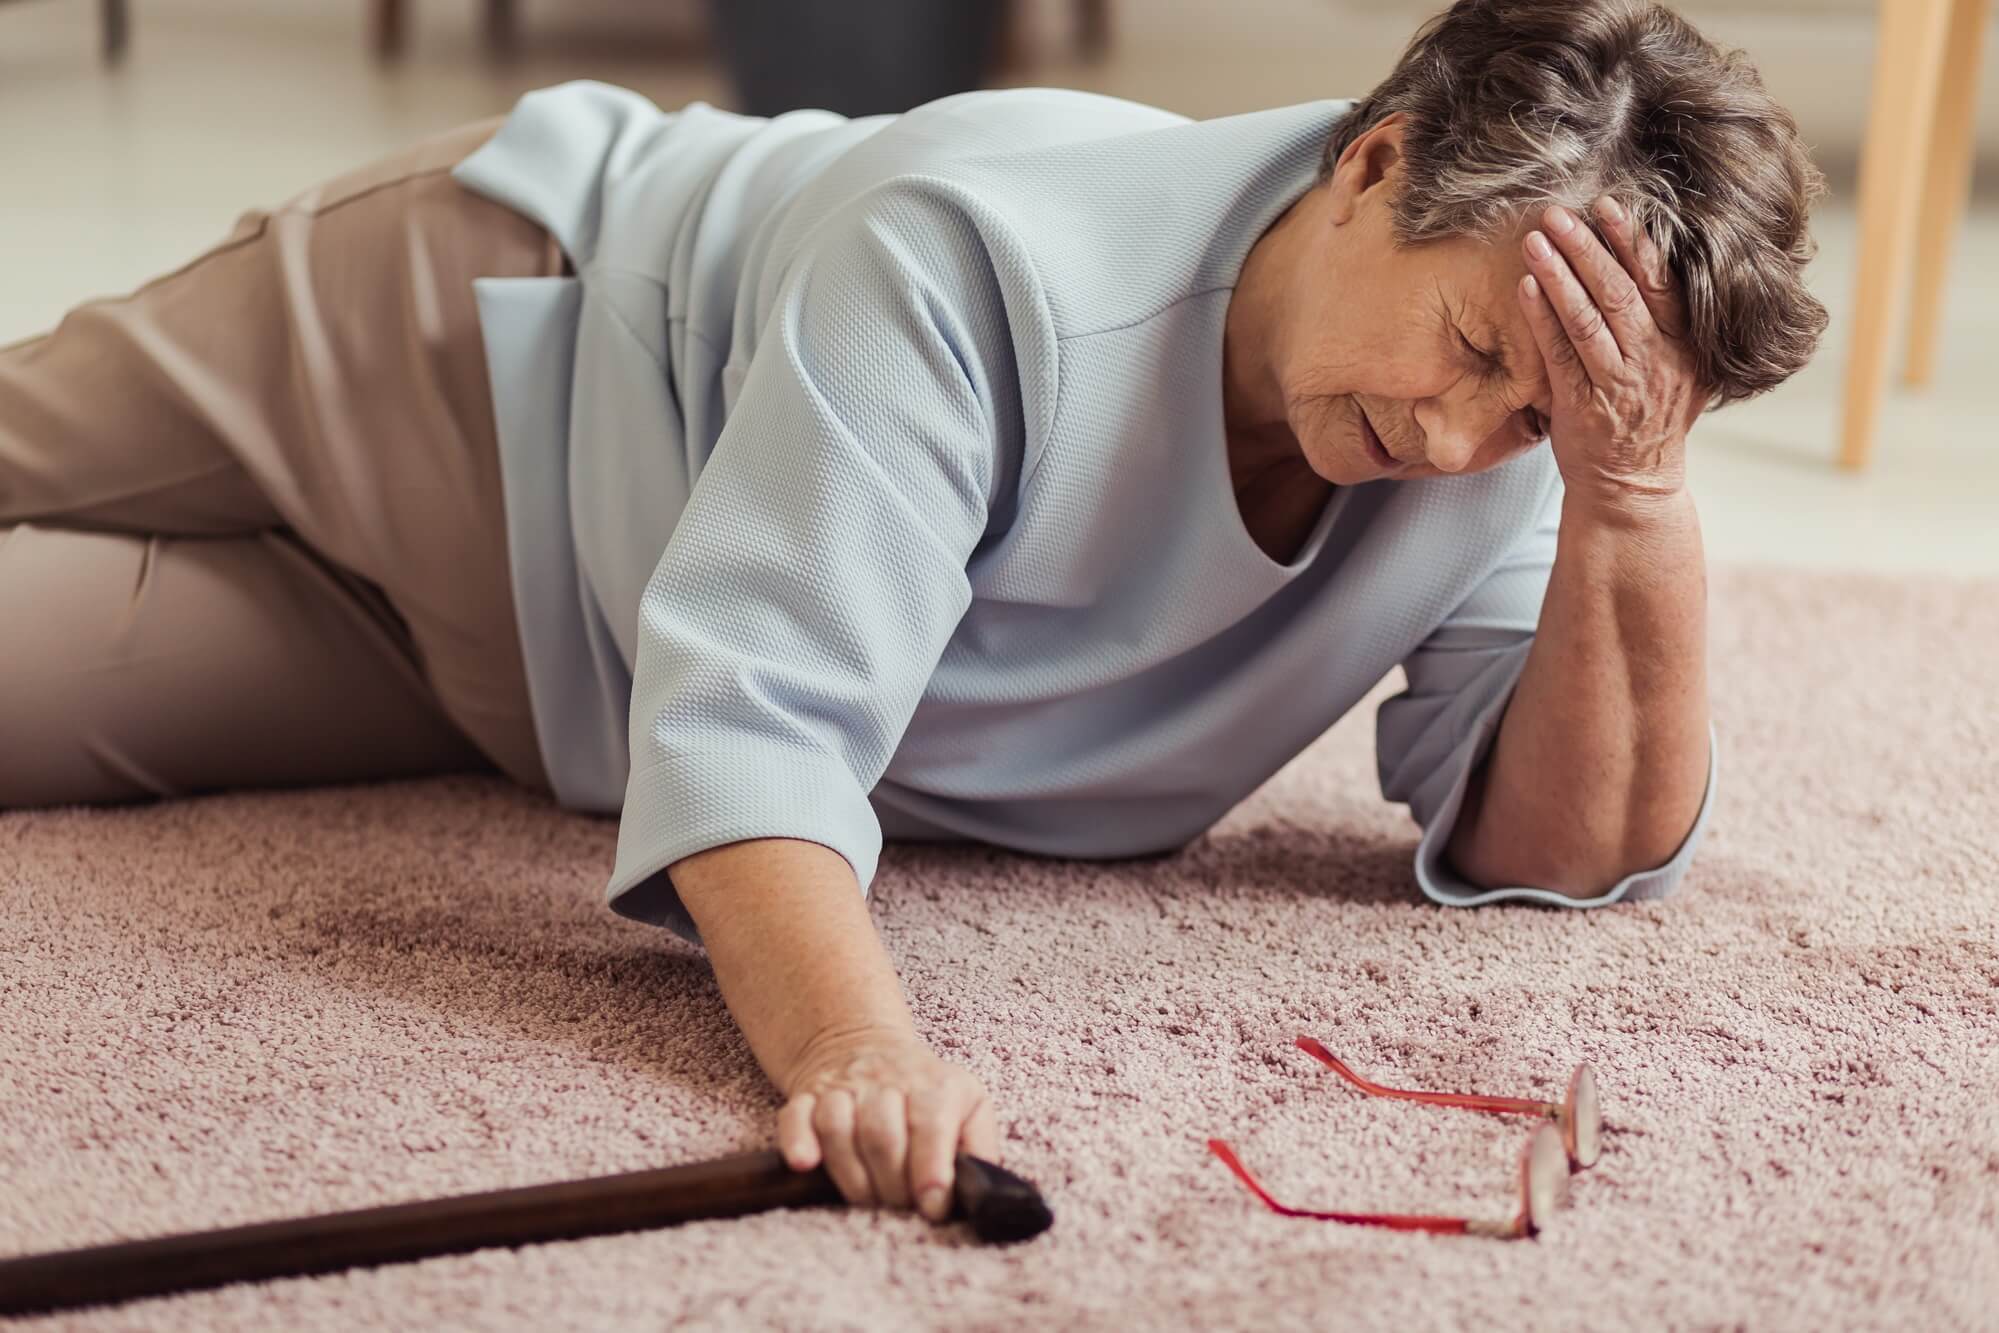 Our fall prevention program helps seniors prevent slips, trips, and falls at home.